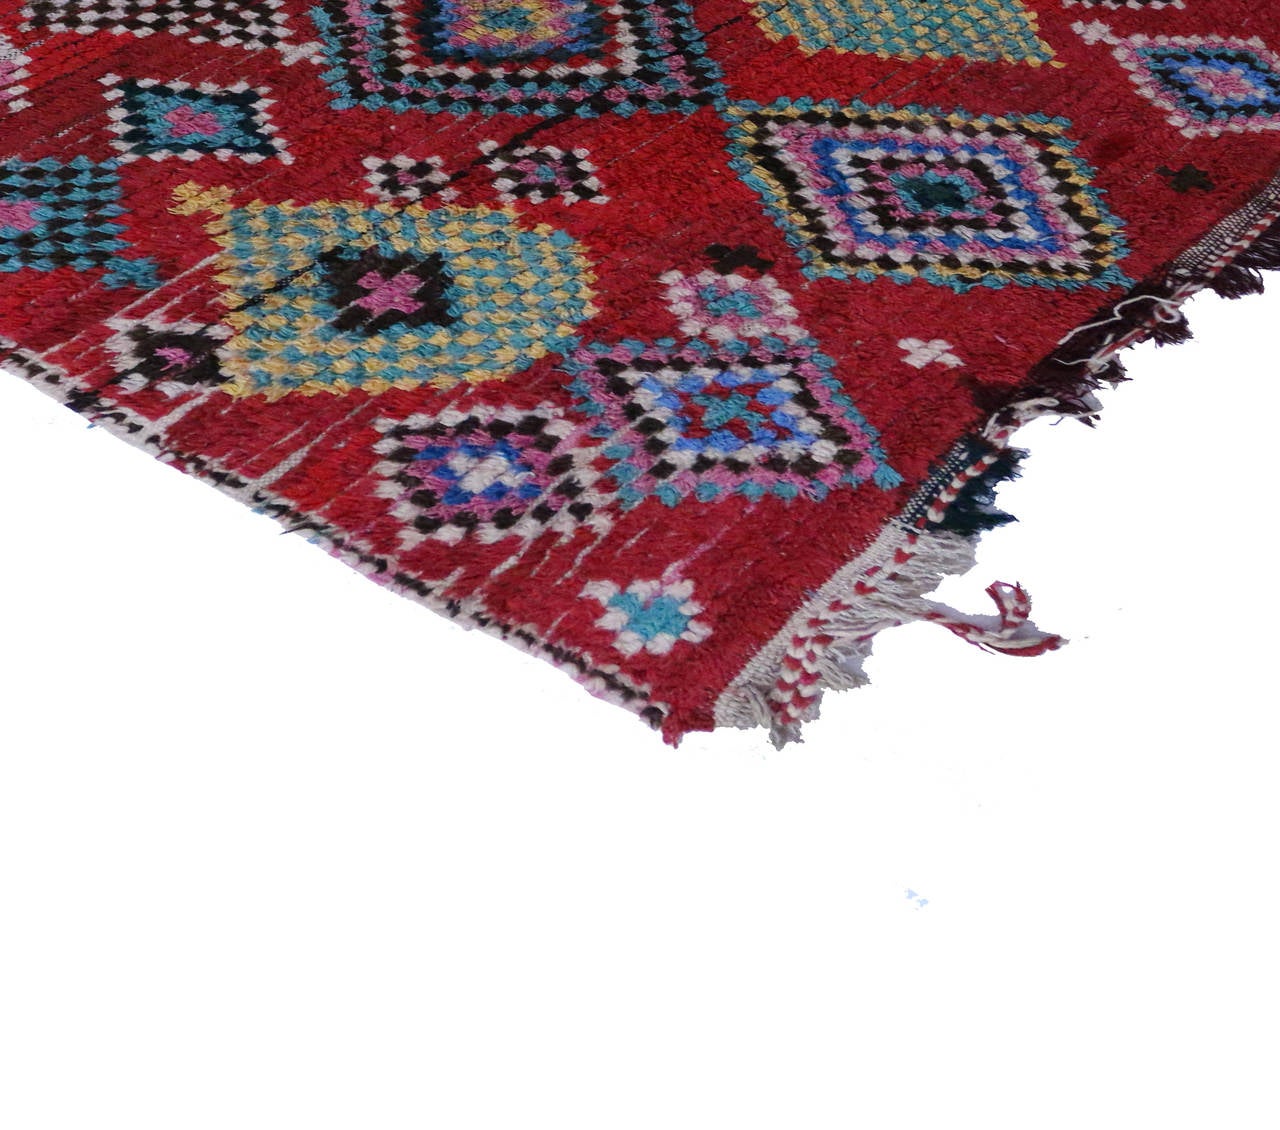 Wool Berber Moroccan Rug with Modern Tribal Design and Boho Chic Style